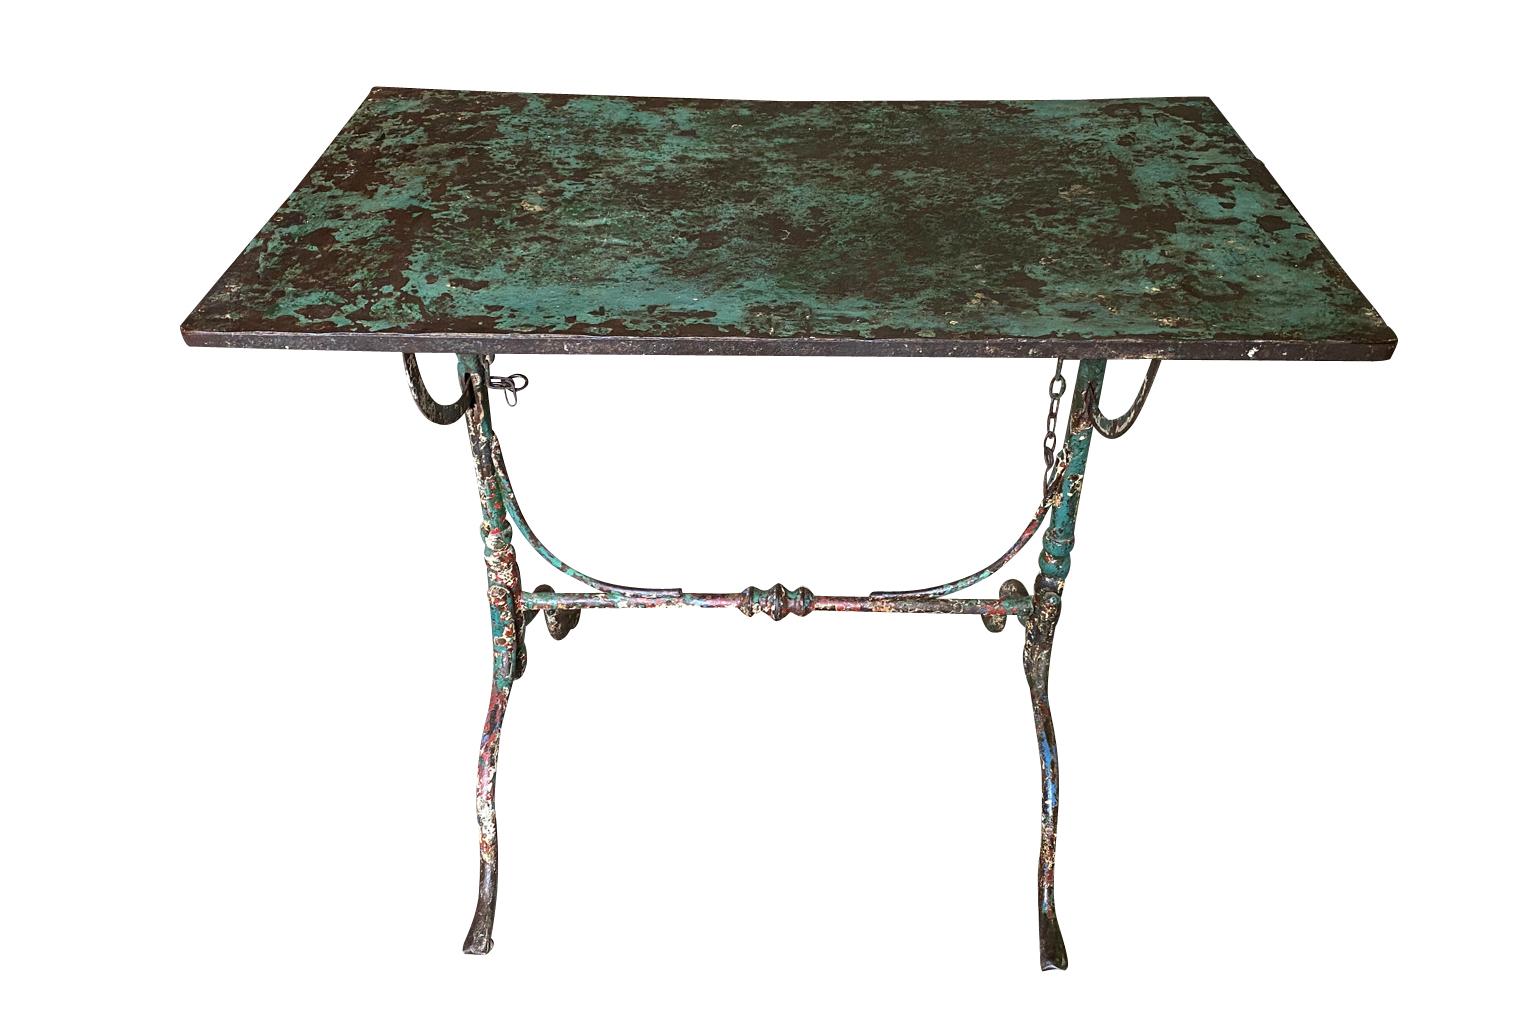 A wonderful and charming early 19th century Garden Table from the Provence region of France.  Soundly crafted from painted iron with a plateau that tilts and wonderfully sculpted legs, stretcher and feet.  Super patina and finish.  Perfect for any